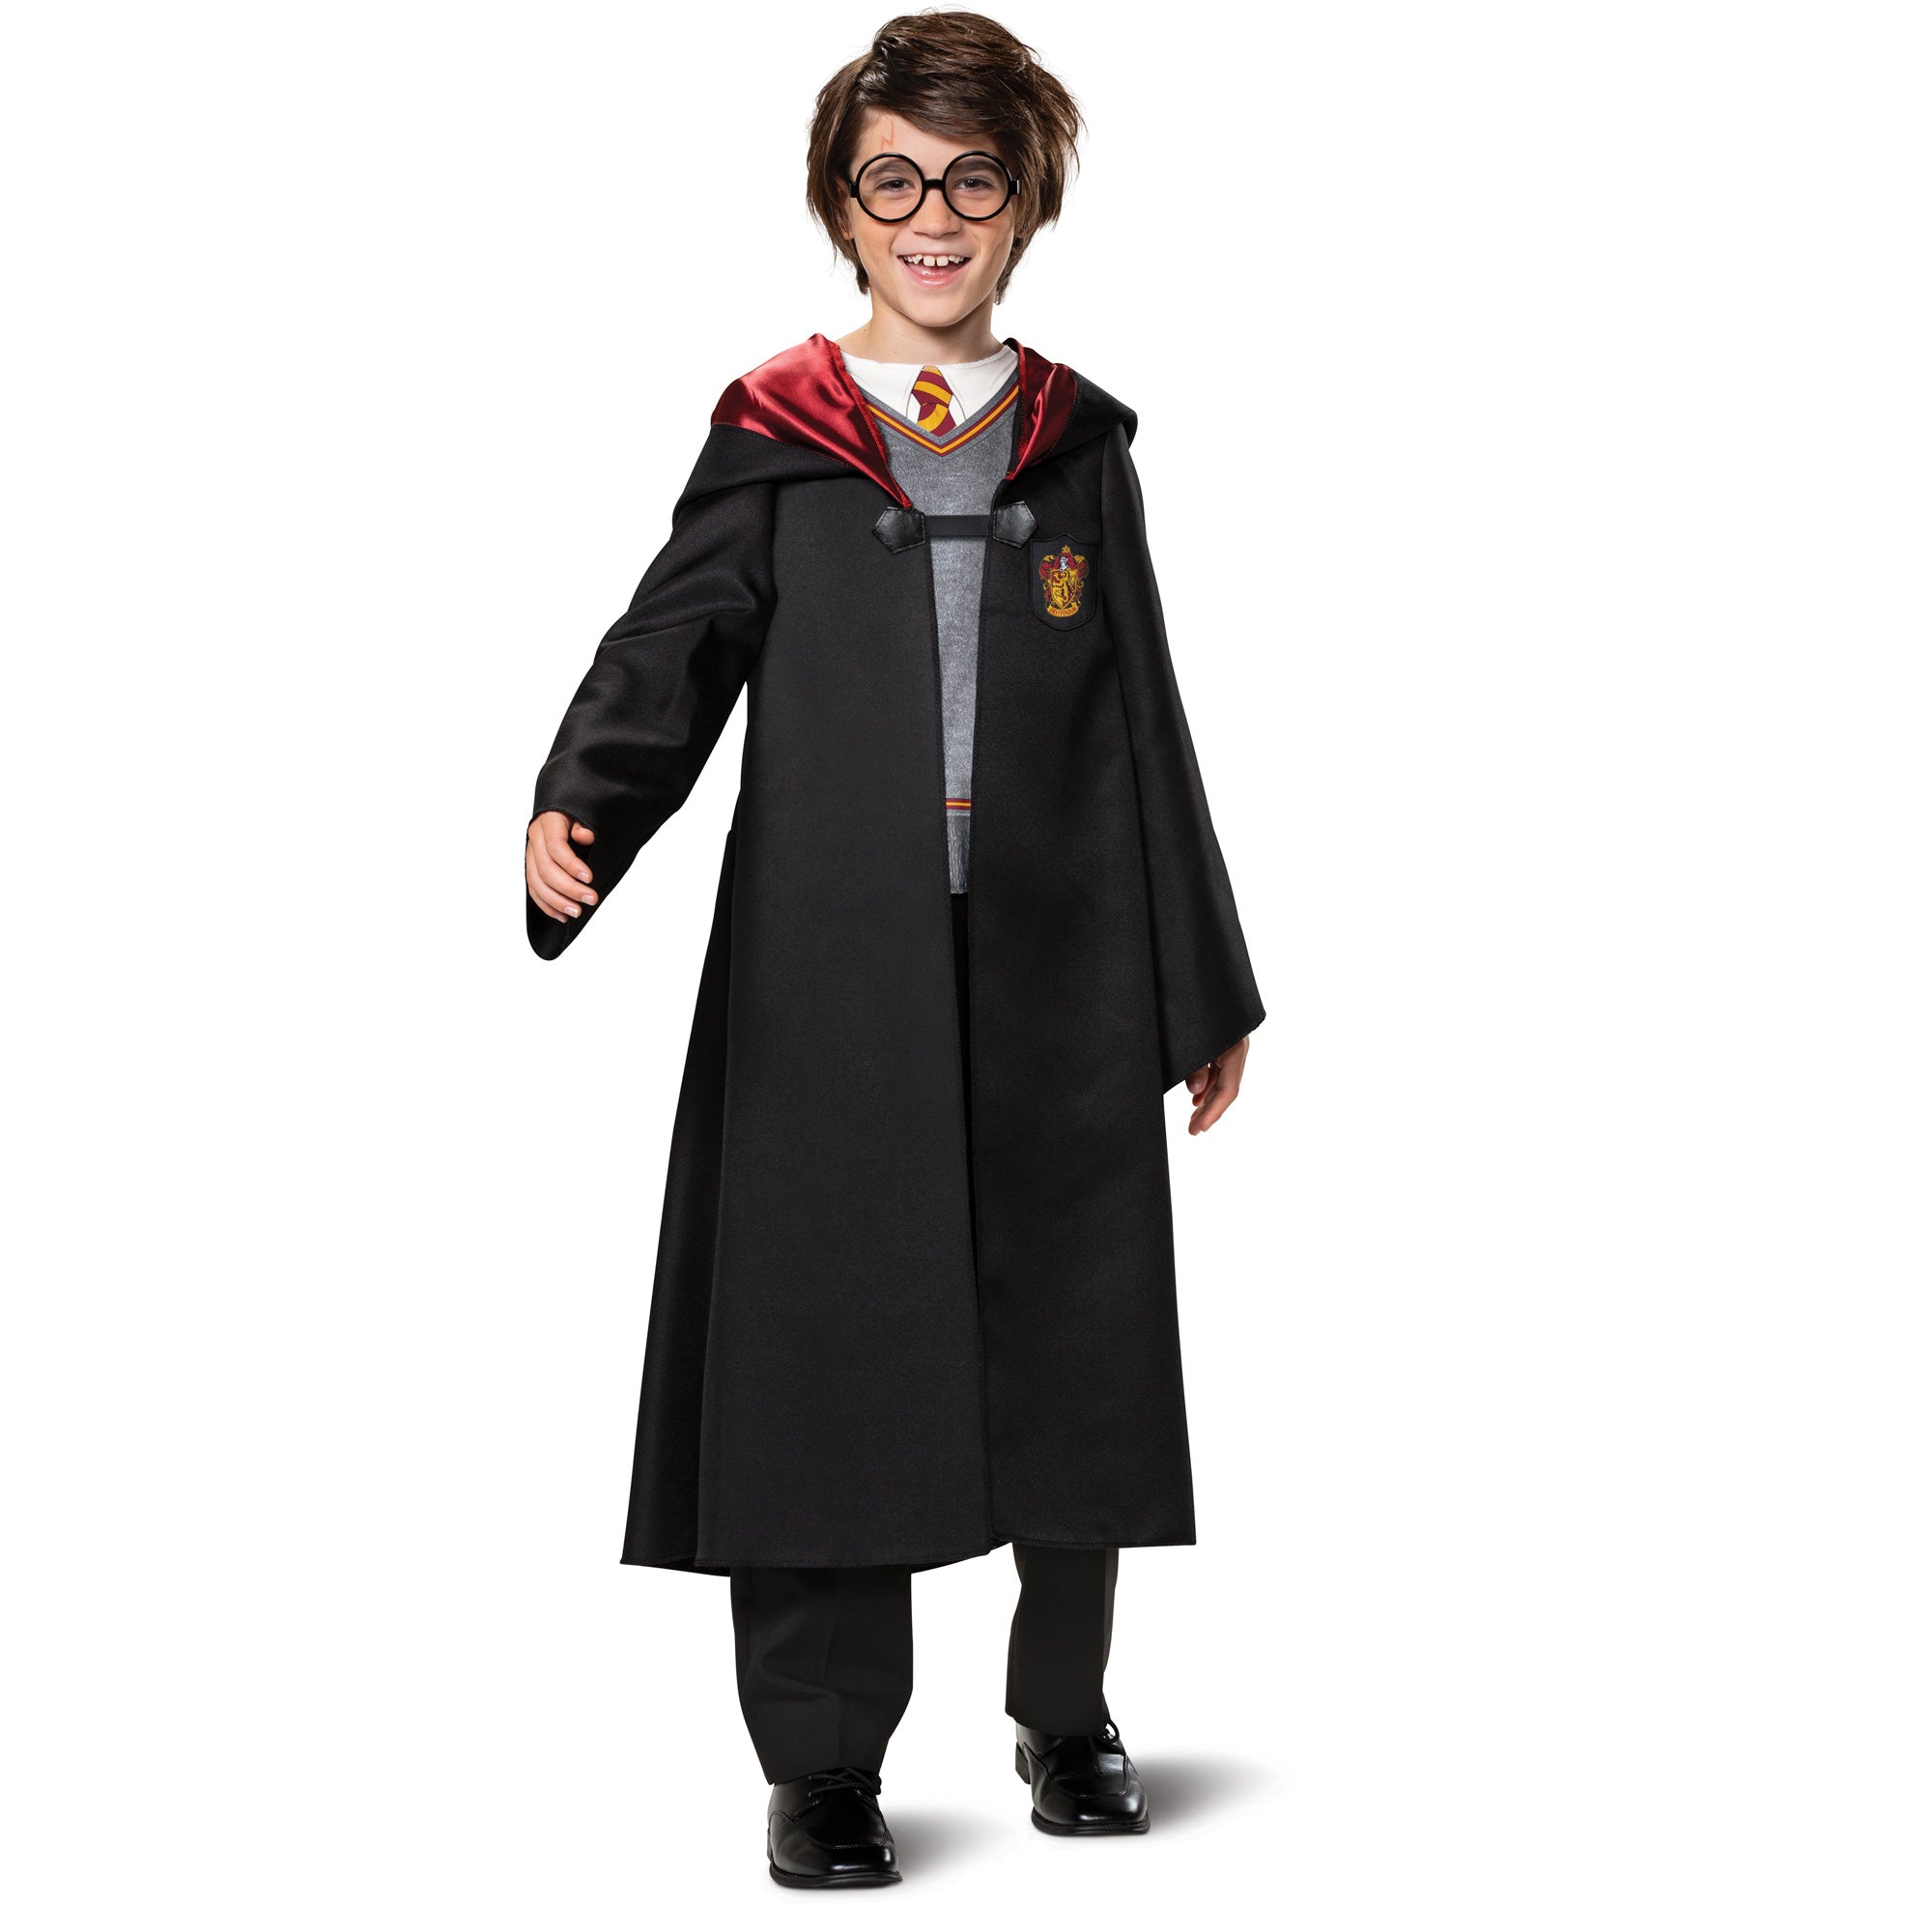 Harry Potter Gryffindor Robe Costume for Kids, Black and Red Satin Robe